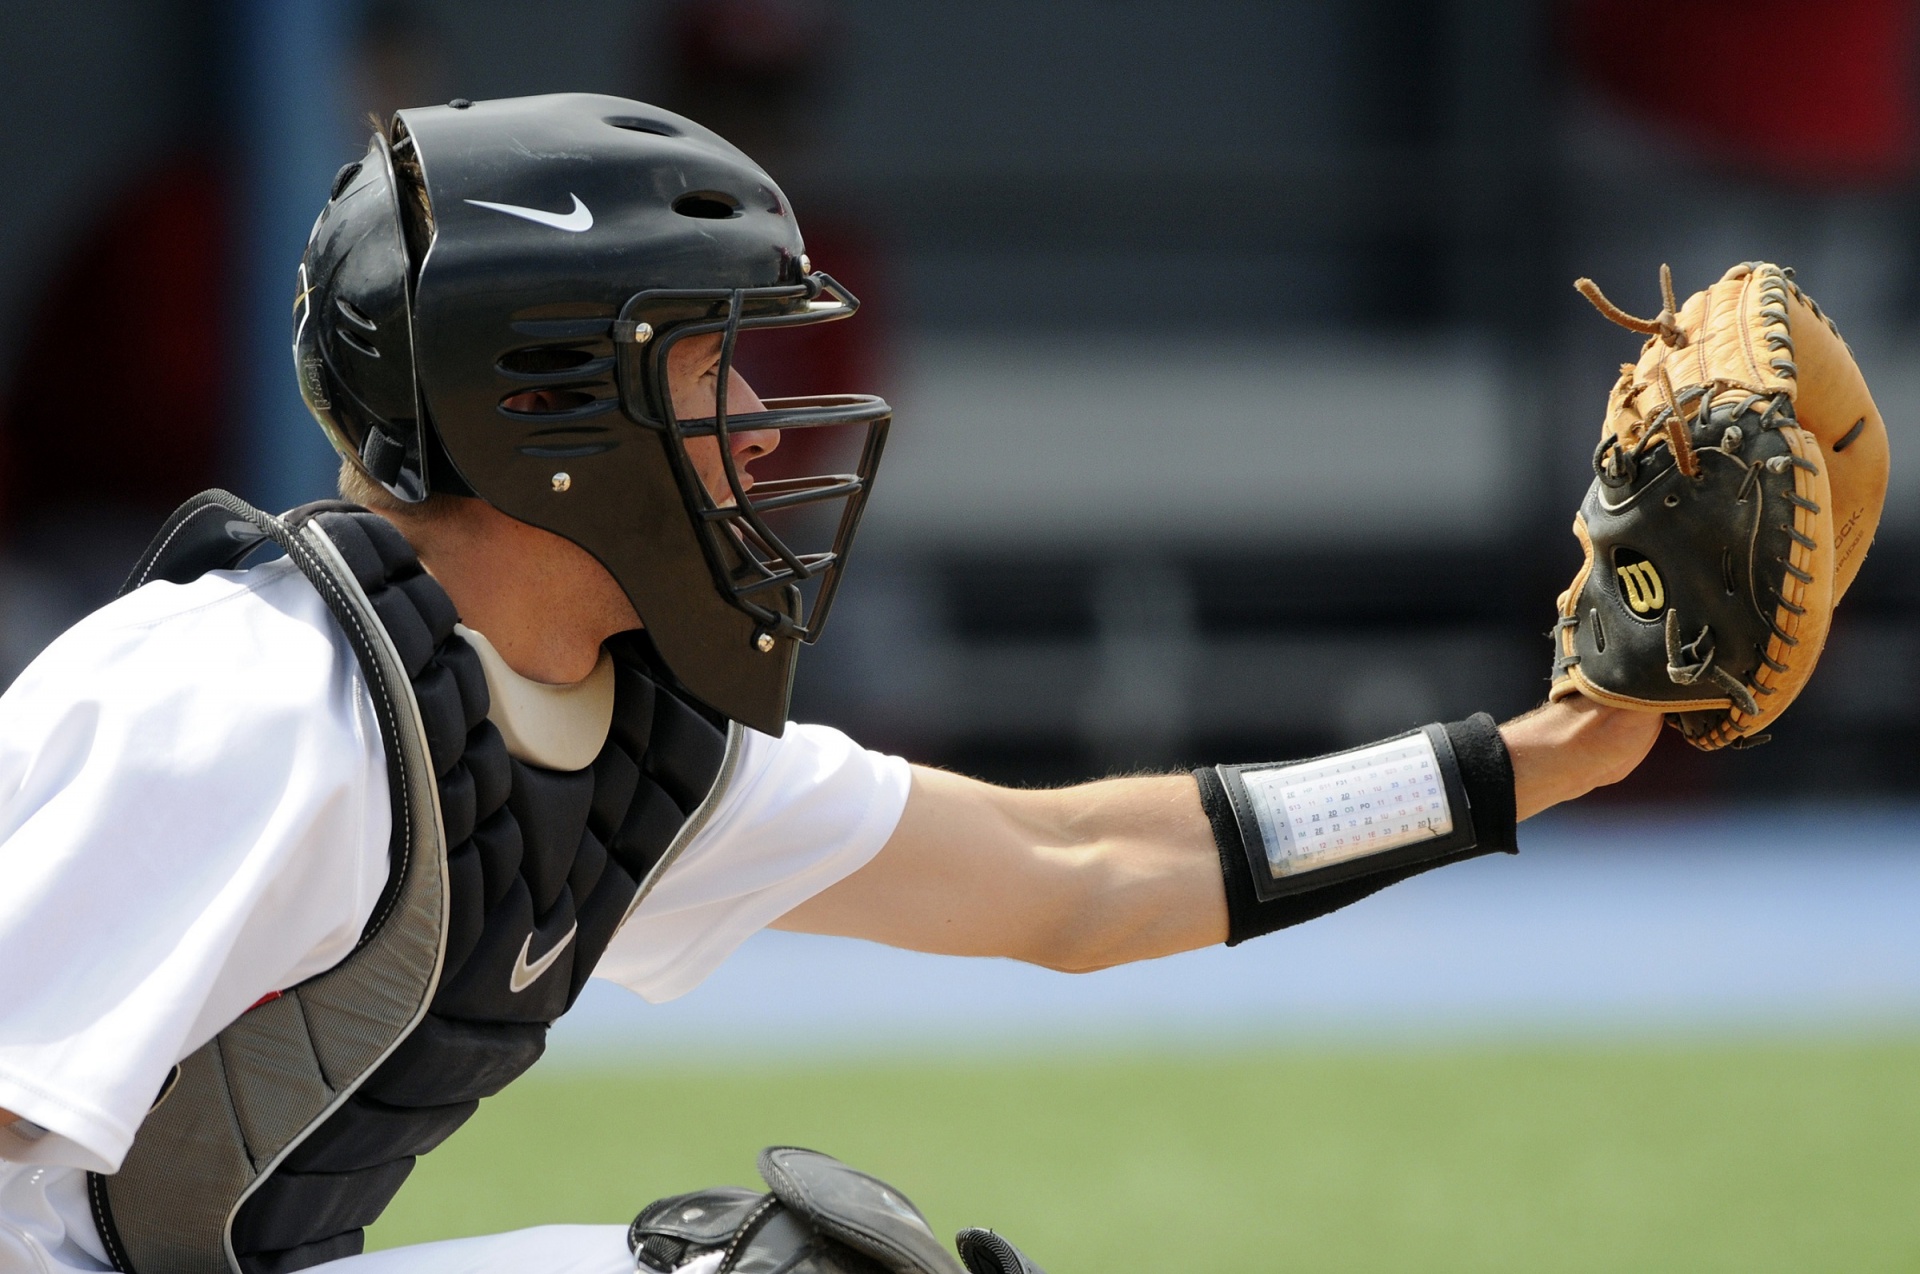 Download free photo of Baseball player, catcher, ball, sport, public domain